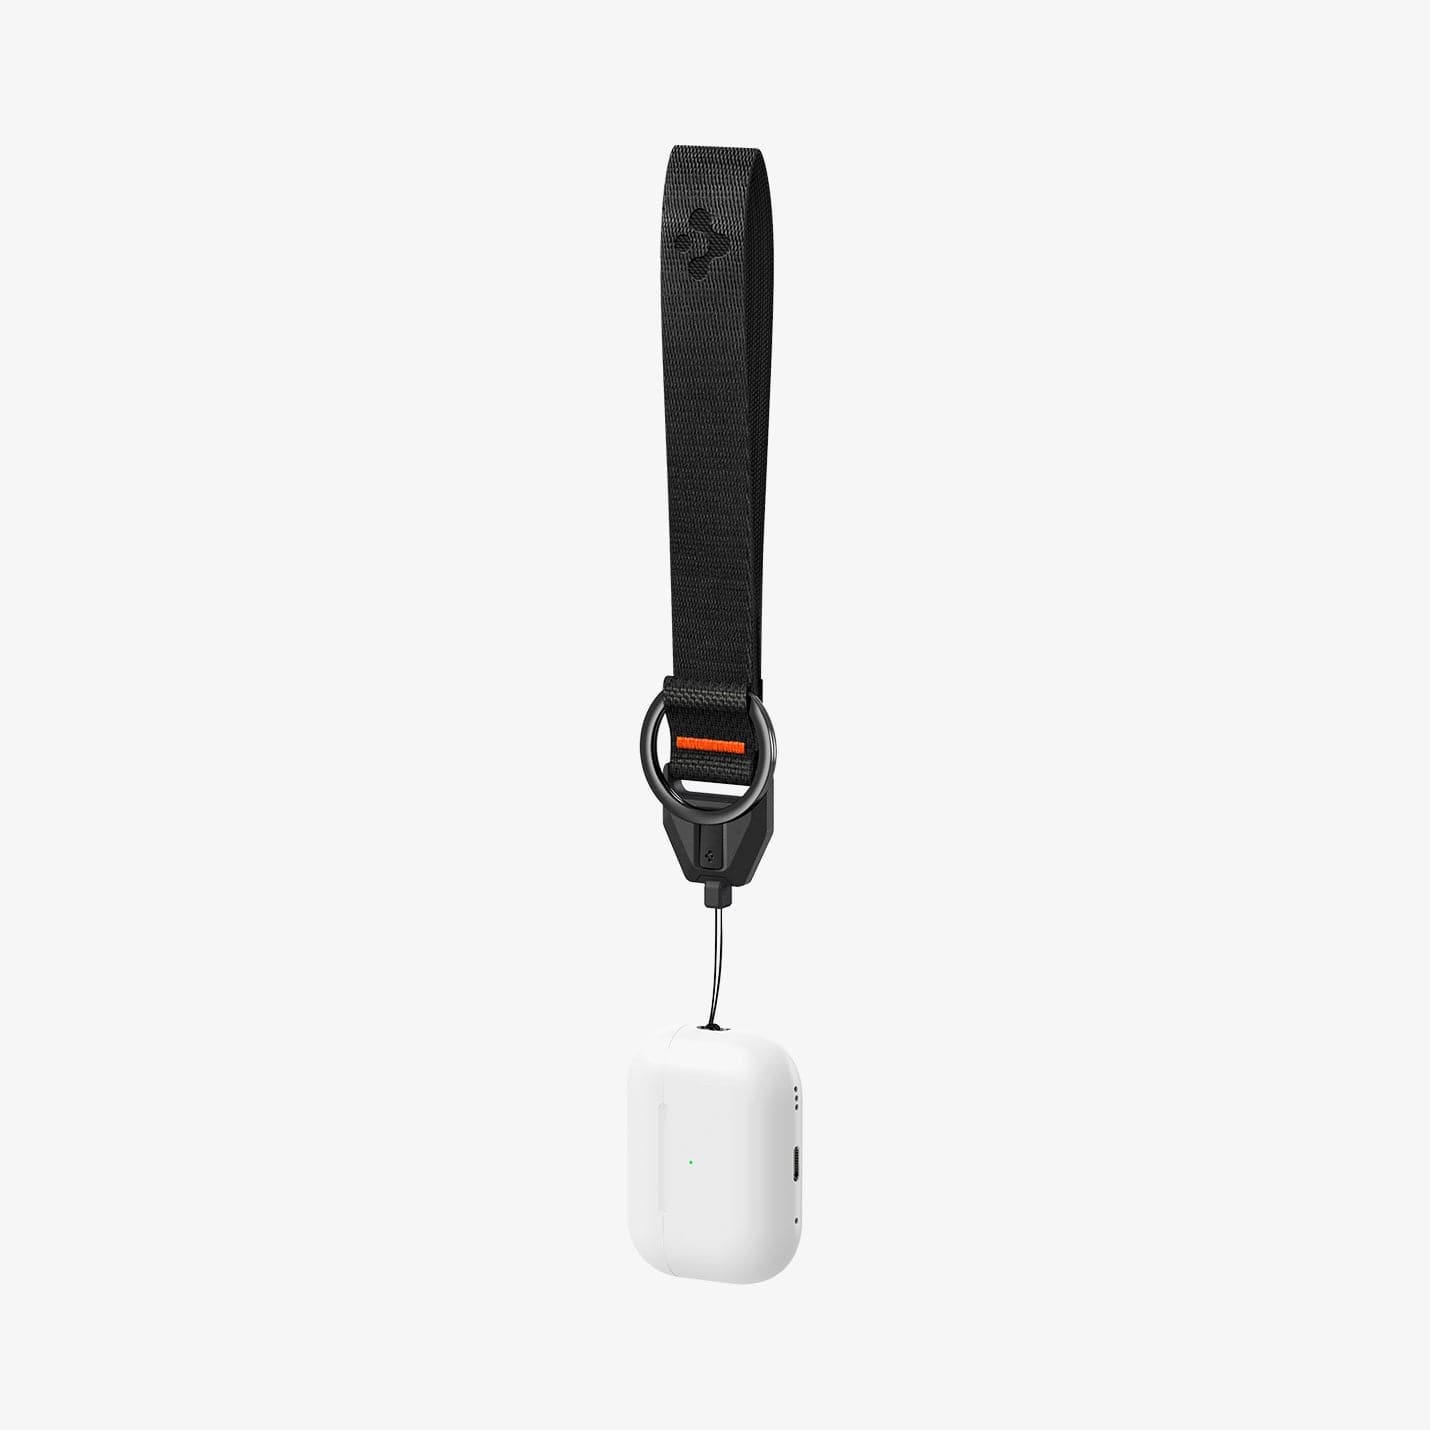 ASD05860 - AirPods Series Lanyard + Keychain in black showing the lanyard attached to AirPods